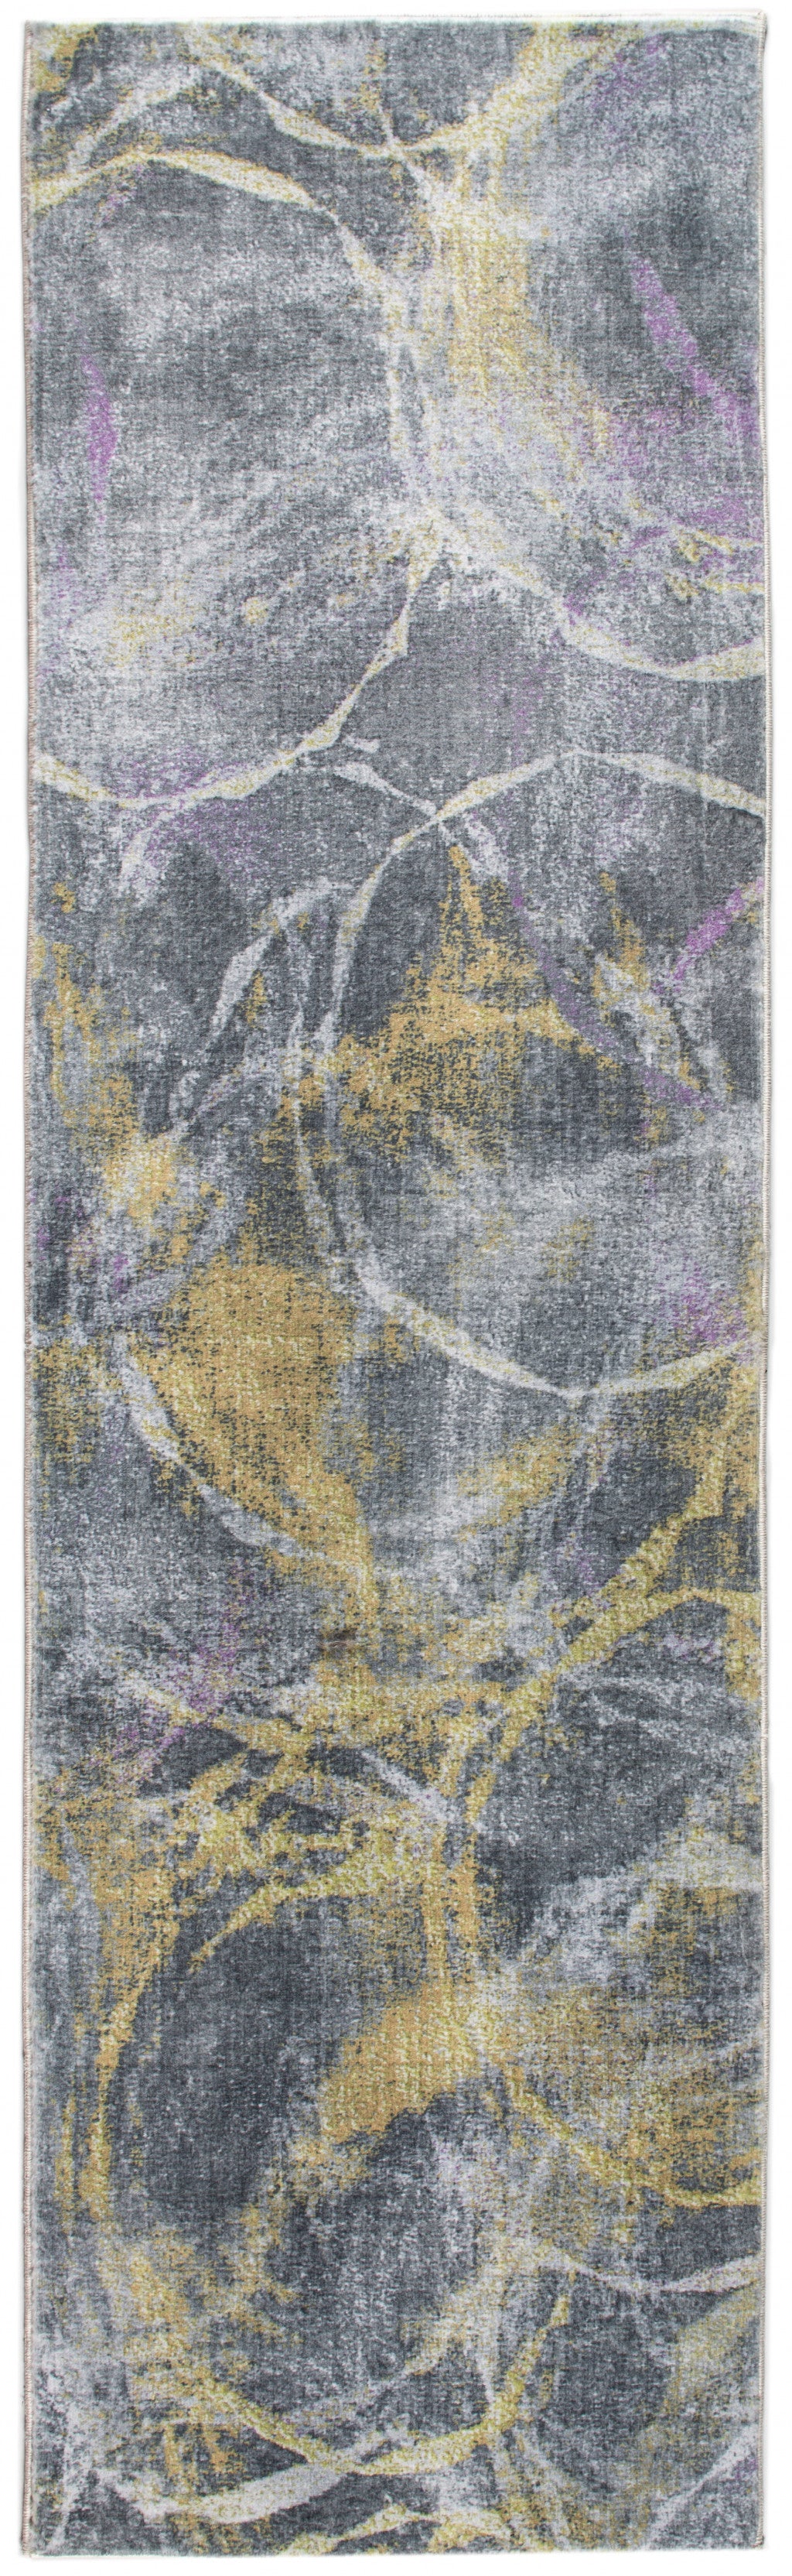 2’ x 7’ Gray Gold Abstract Rings Runner Rug